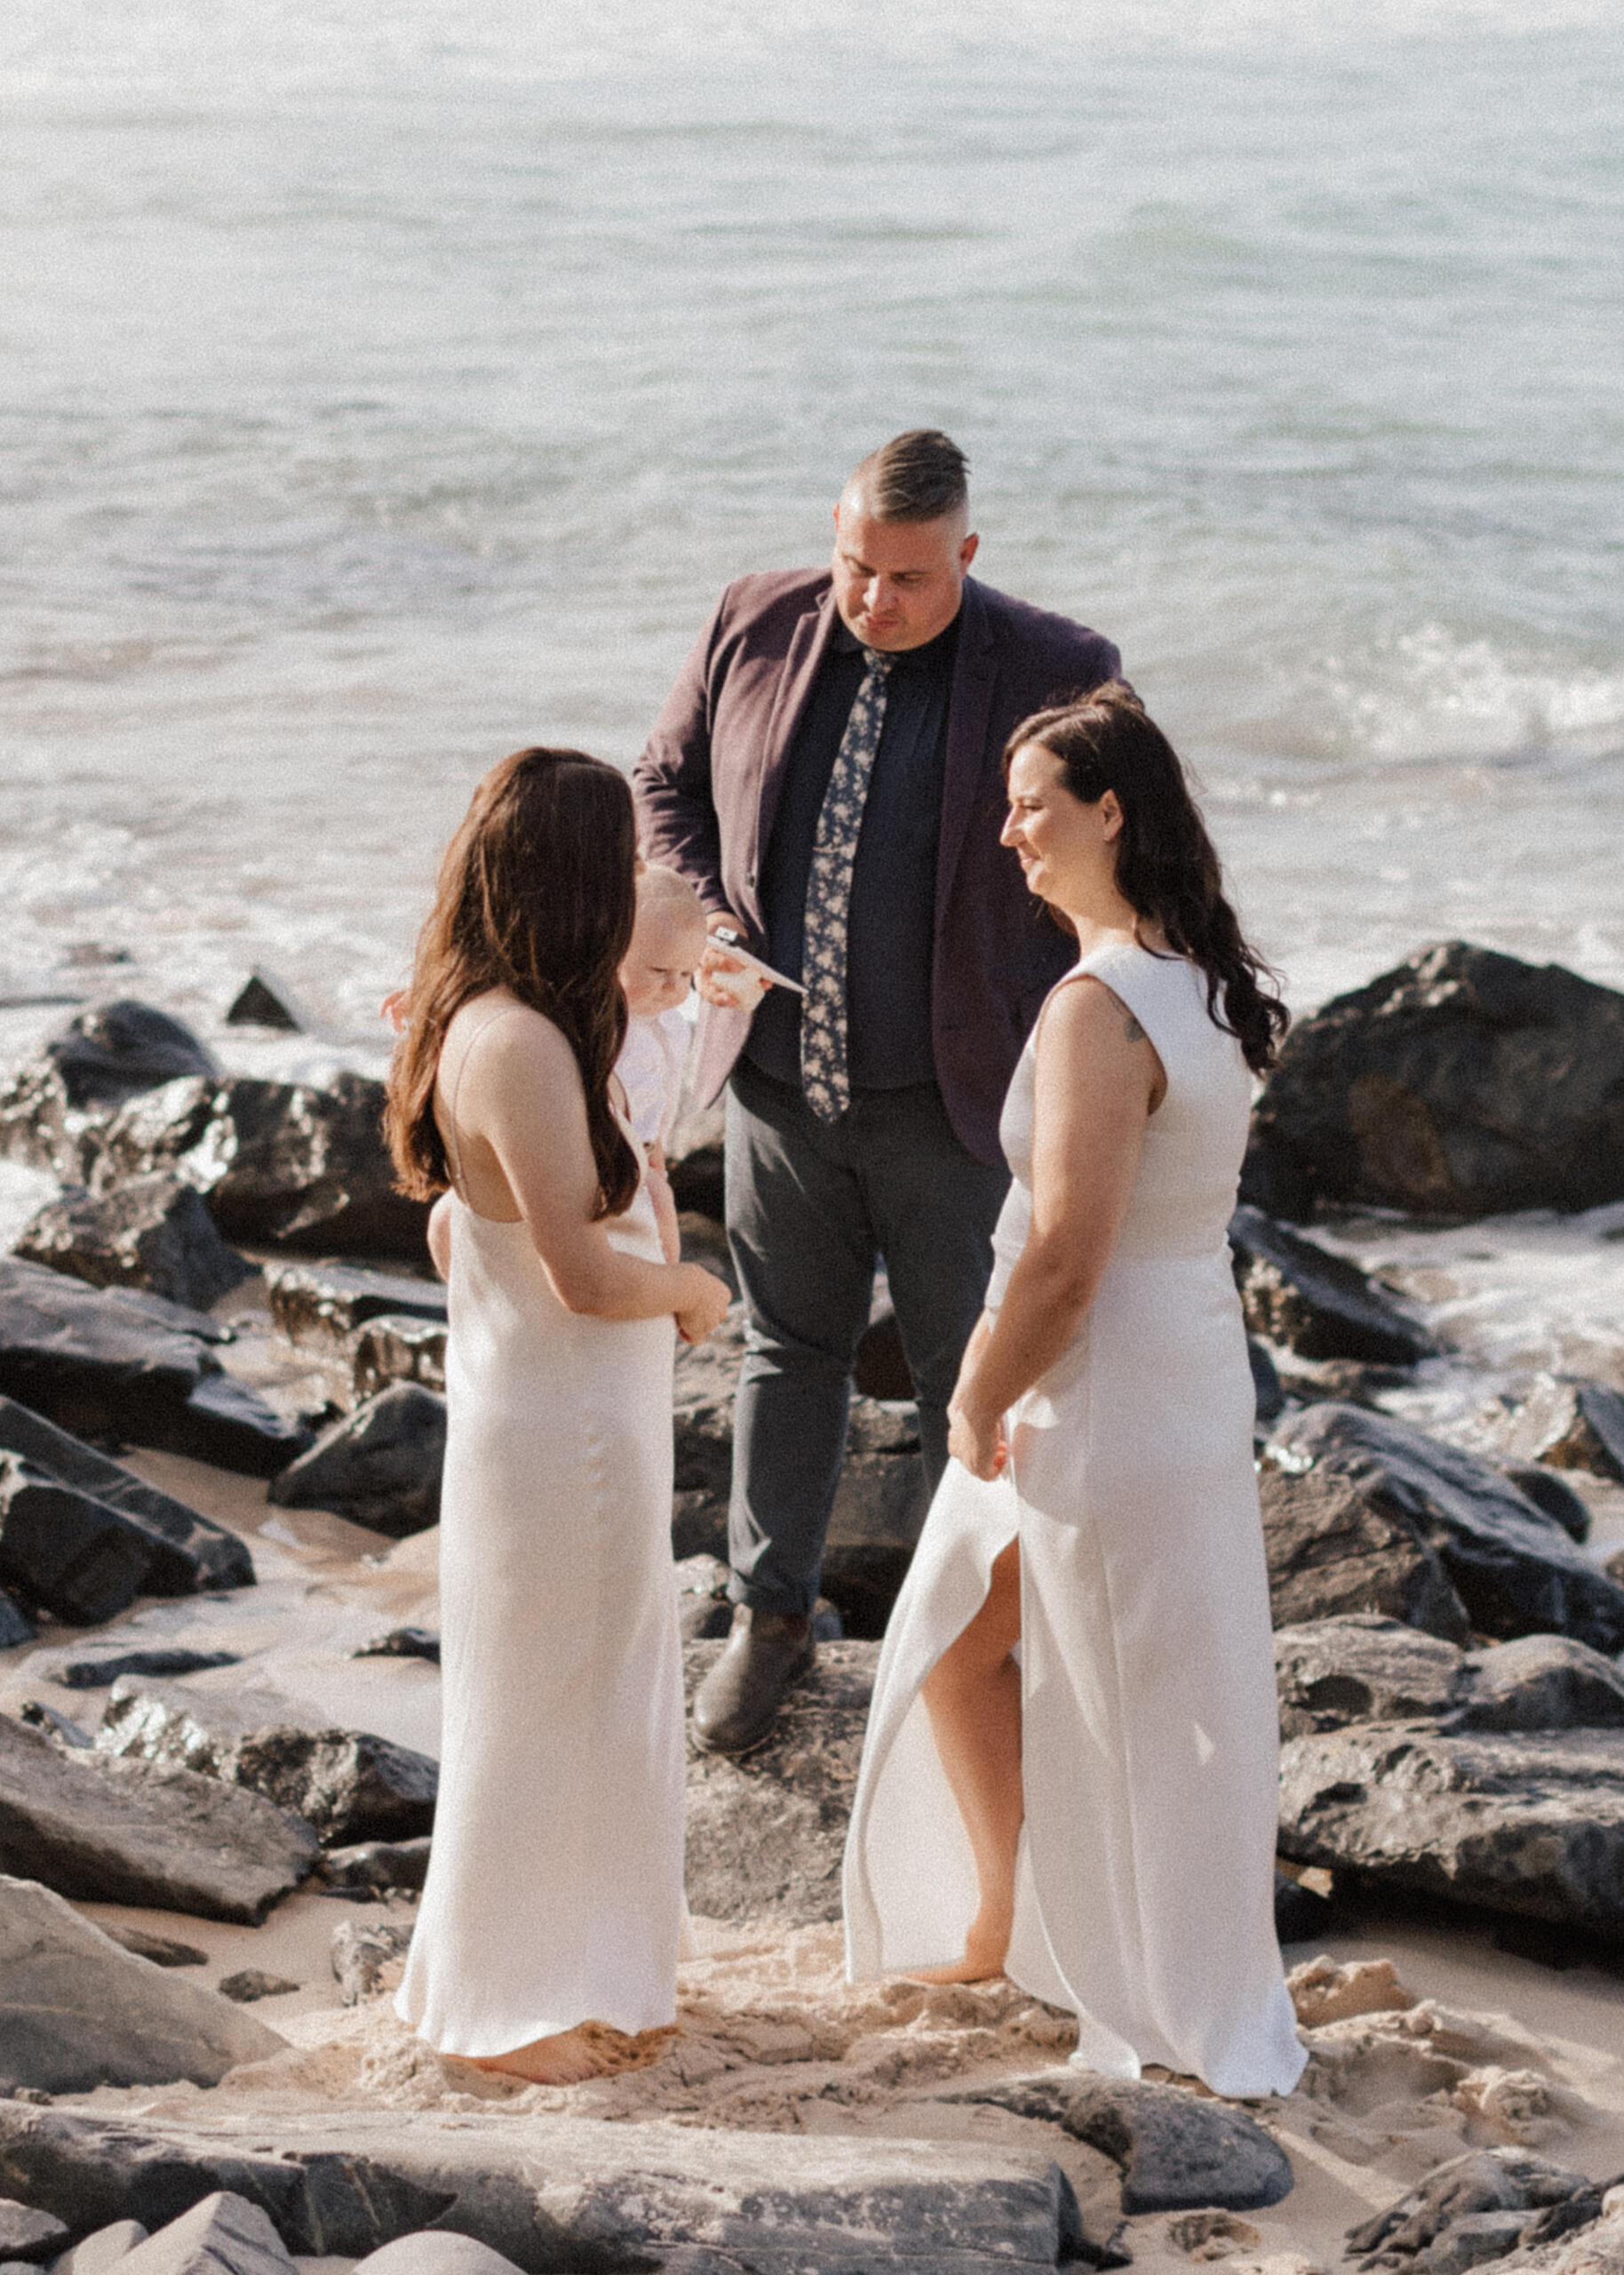 Josh Withers, wedding celebrant, marrying a couple on the beach